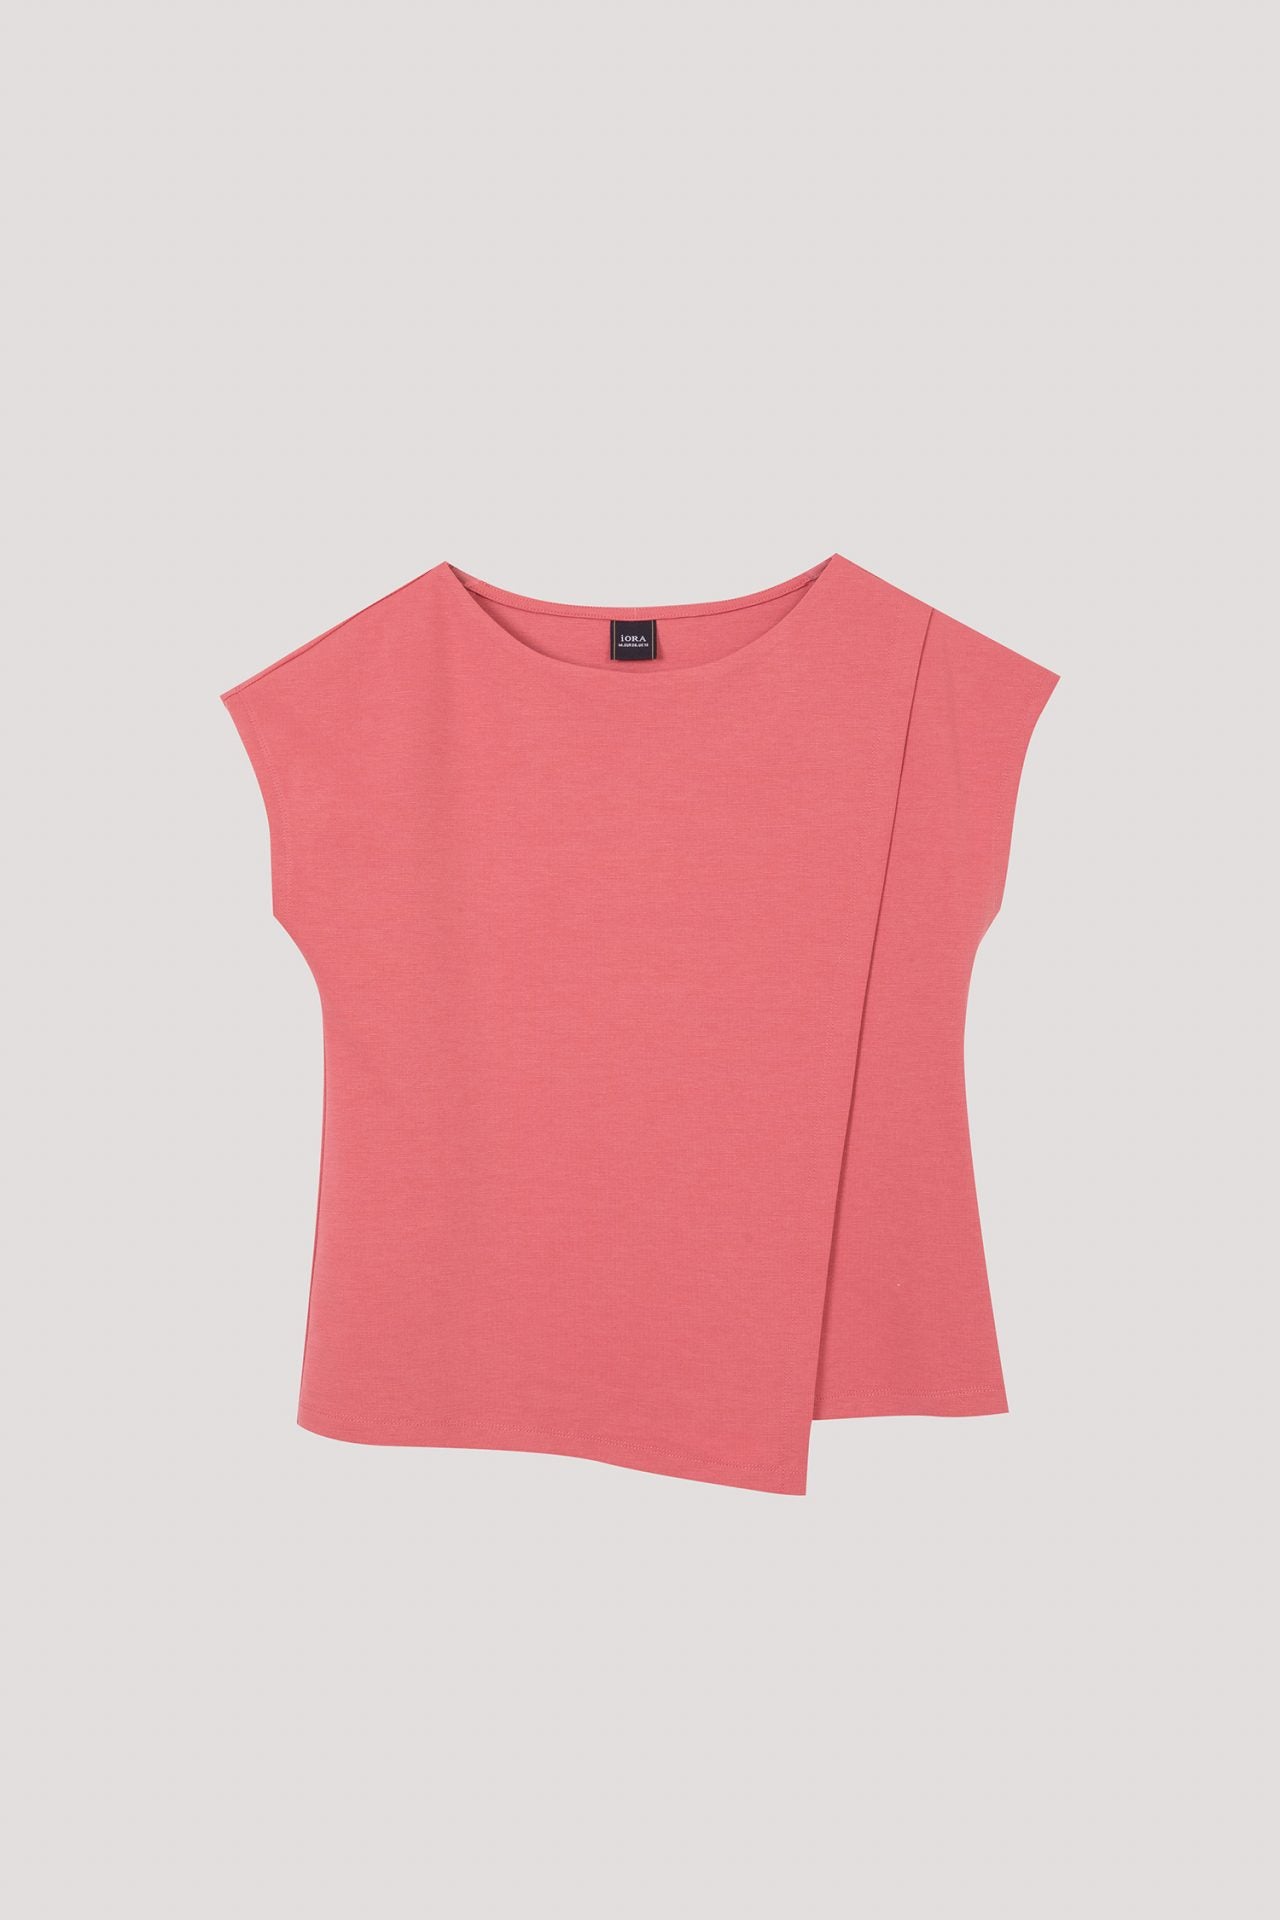 AT 7098 FRONT OVERLAP BLOUSE SALMON